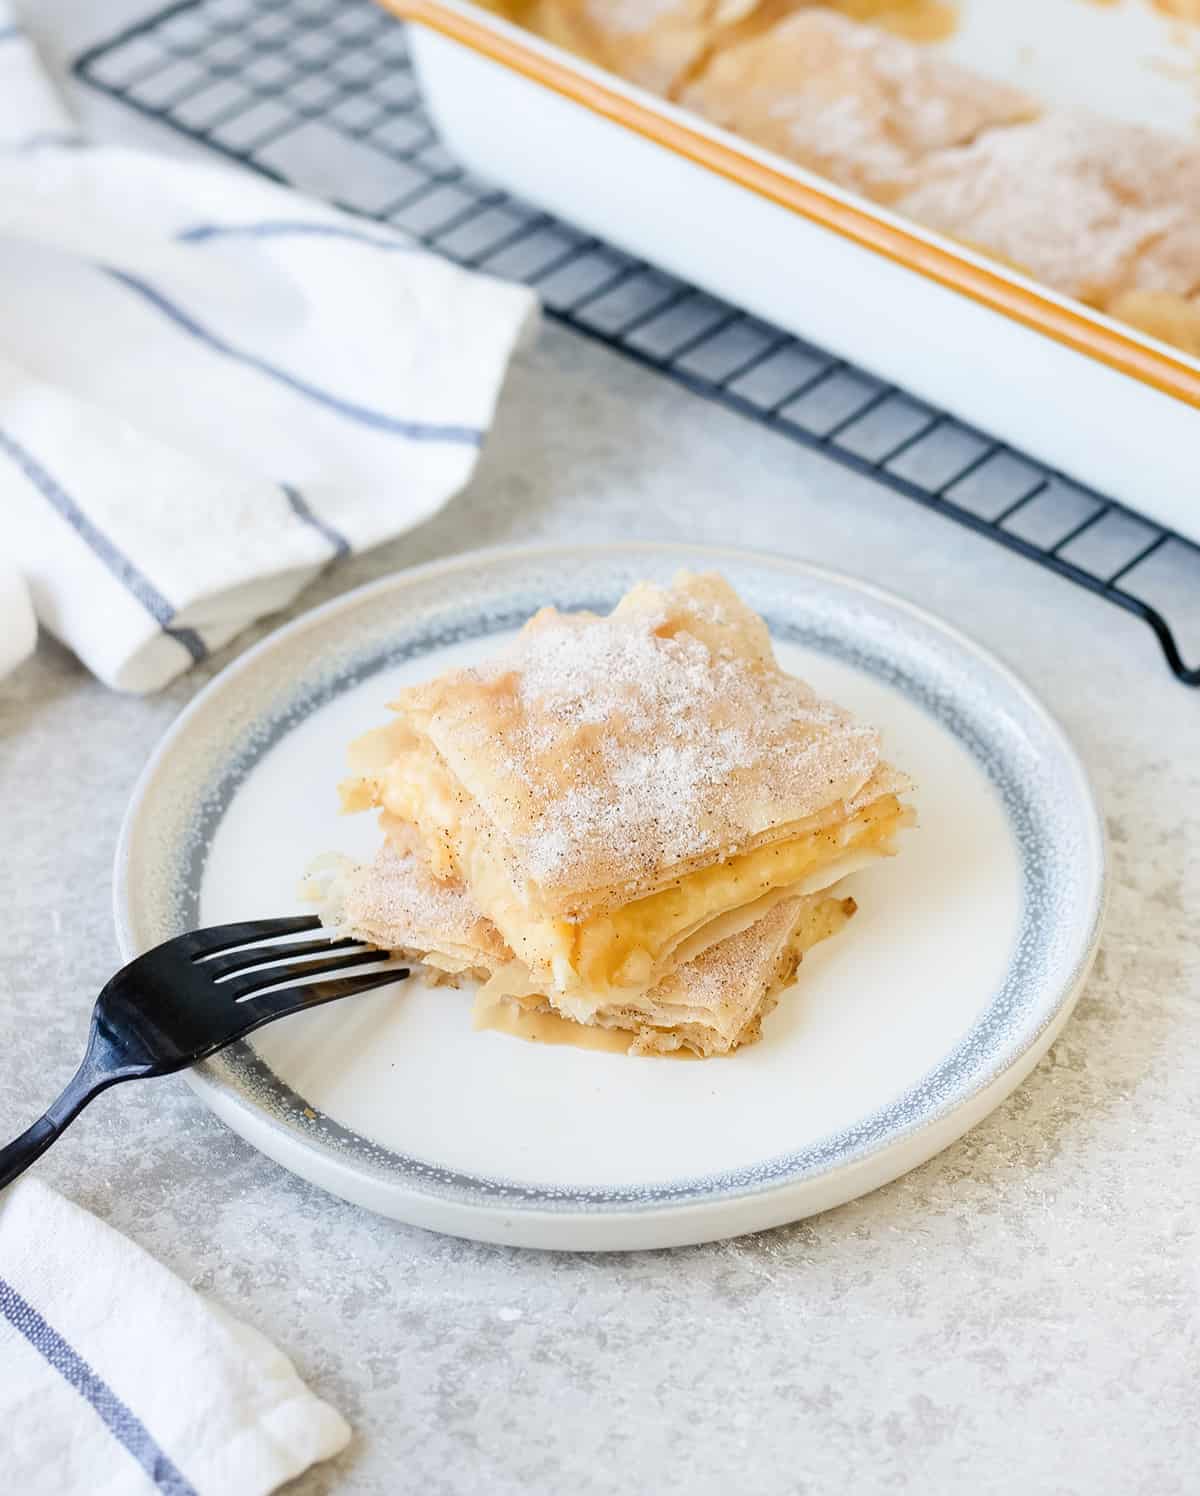 Filo custard pie slices garnished with powdered sugar on a white plate and a fork on the side.